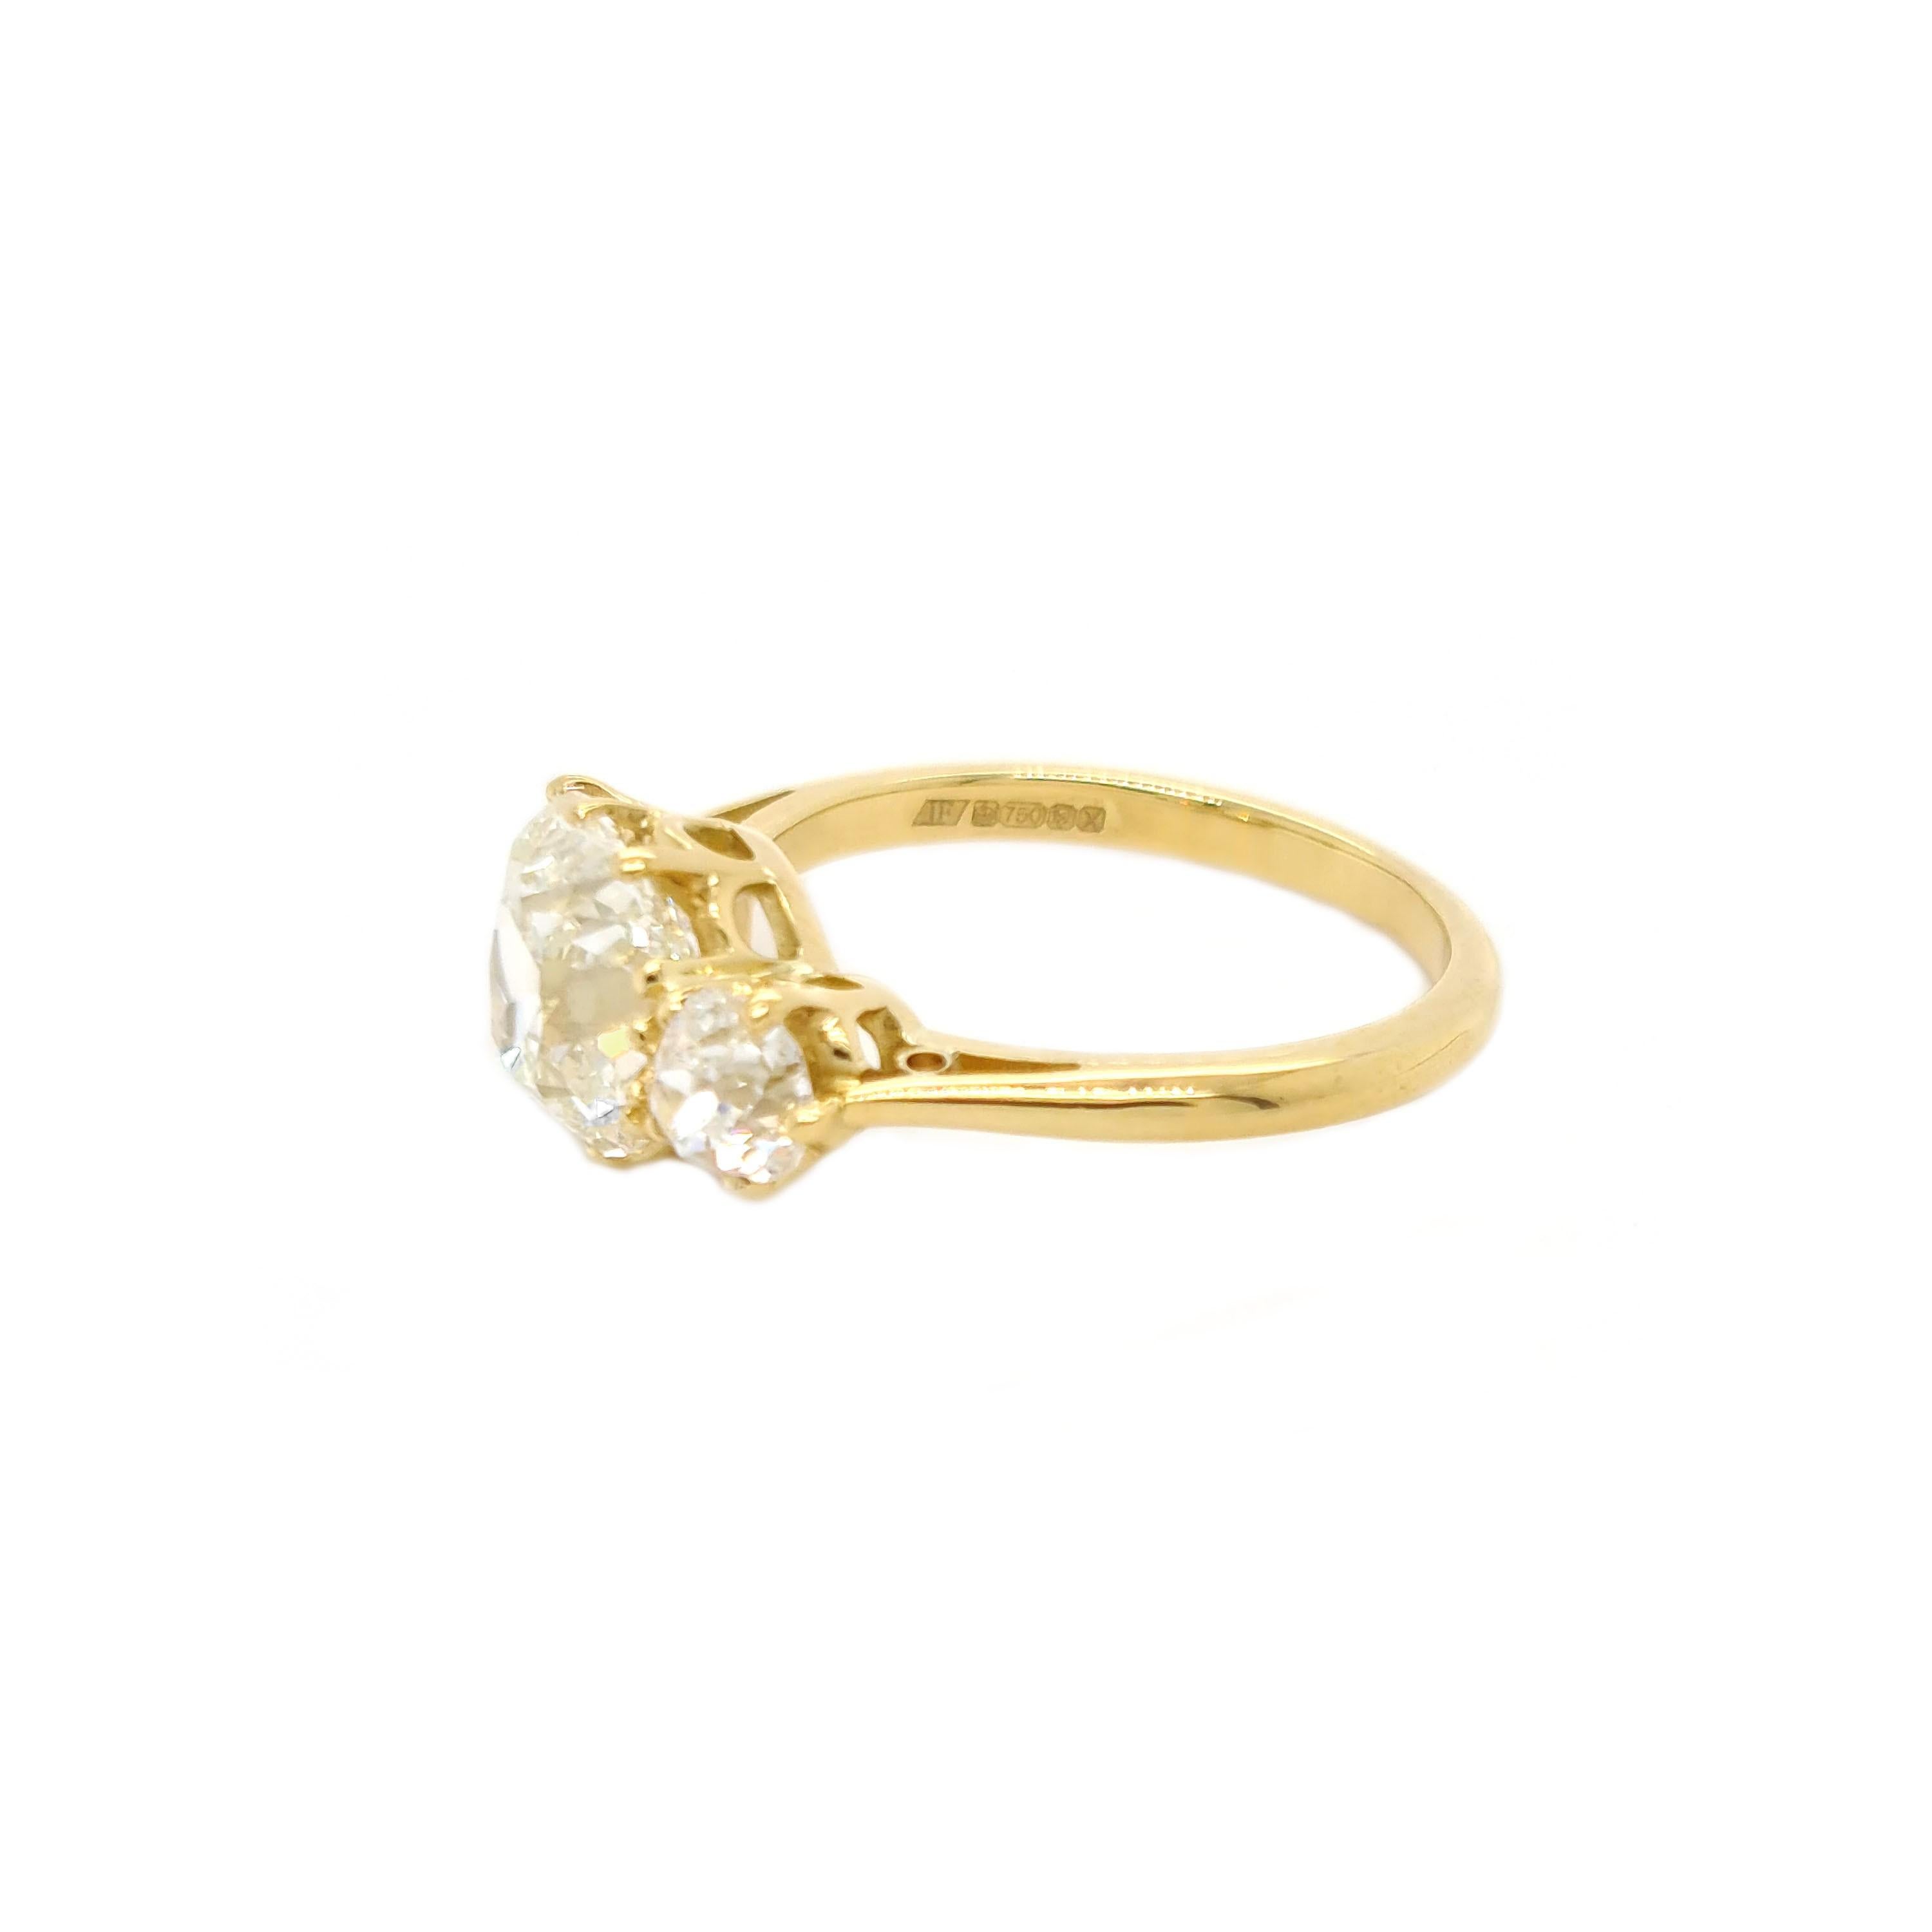 Edwardian Style Three Stone Diamond And Gold Ring, 2.00 Carats J SI1 For Sale 1